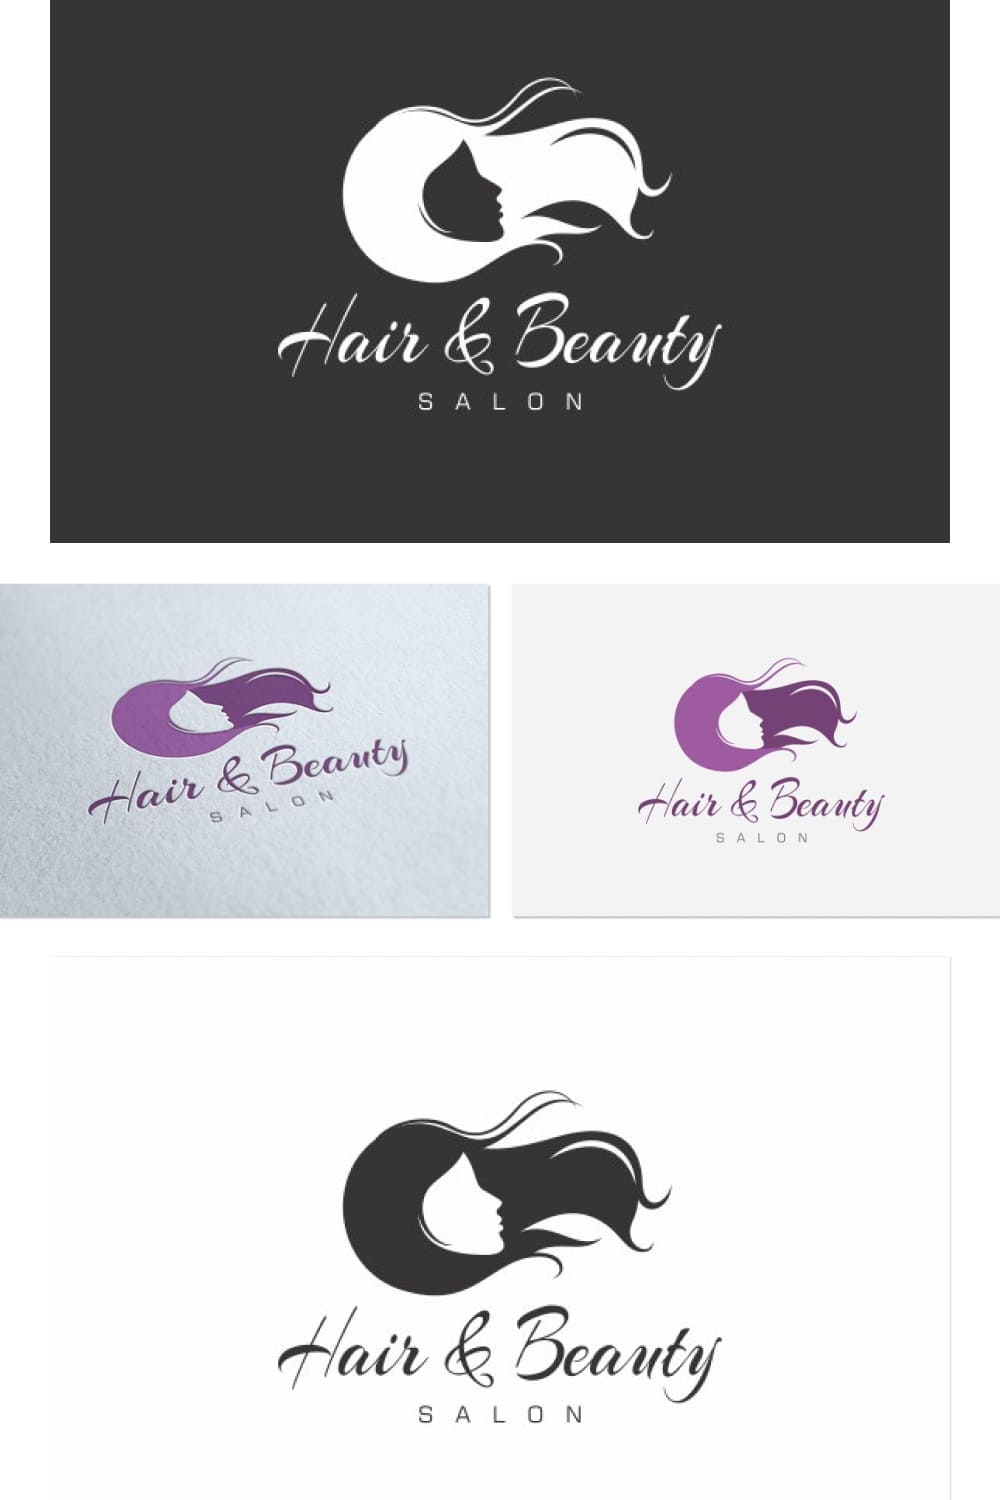 Hair logo style in minimalistic style.